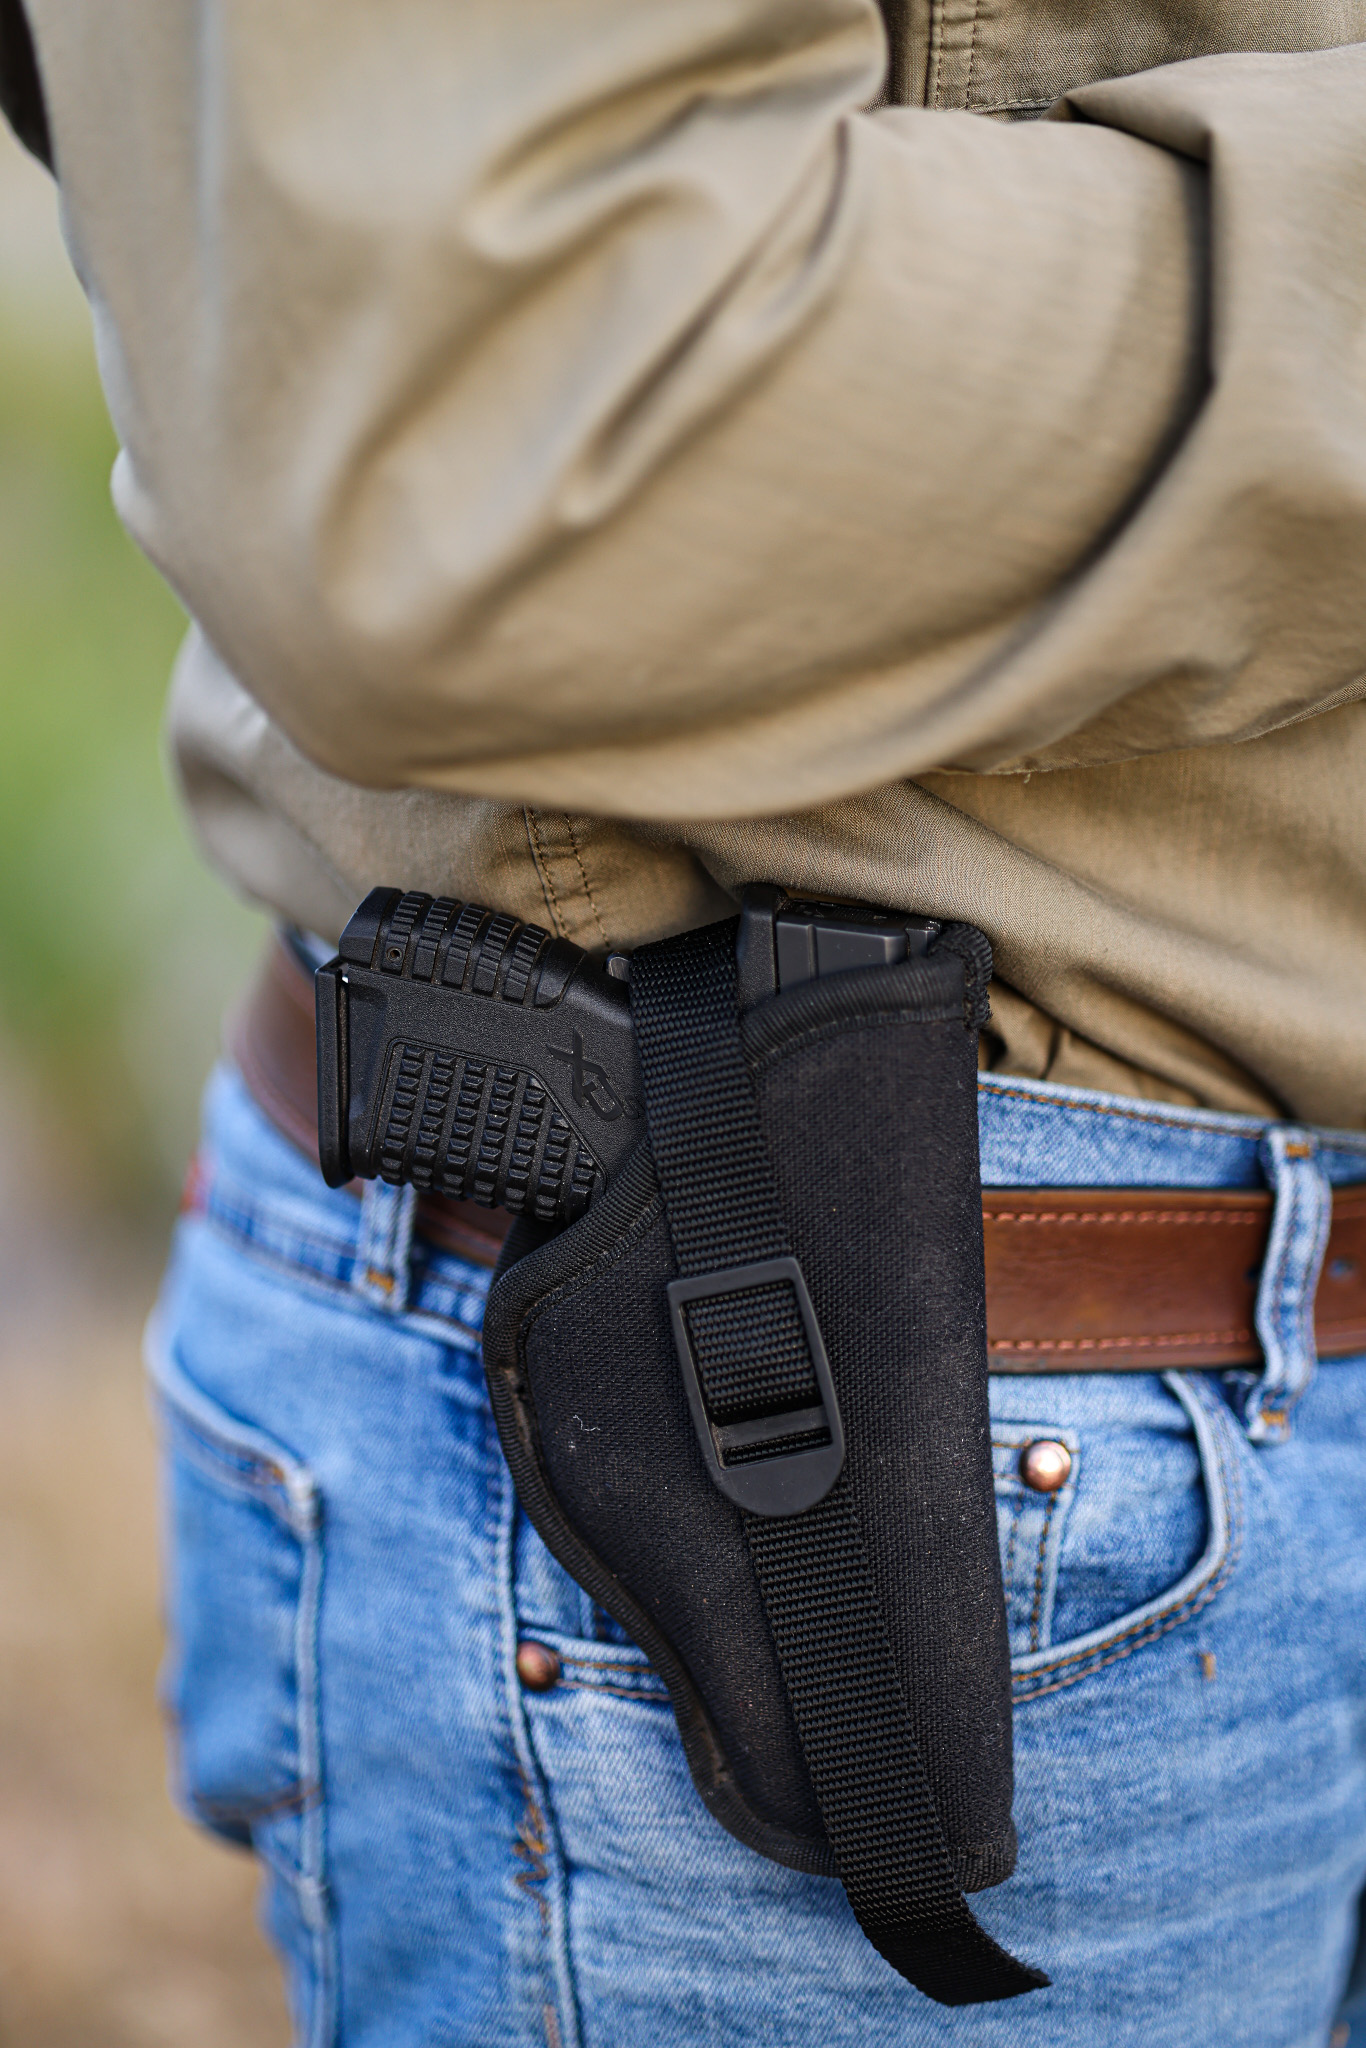 The XDS provides a piece of mind.